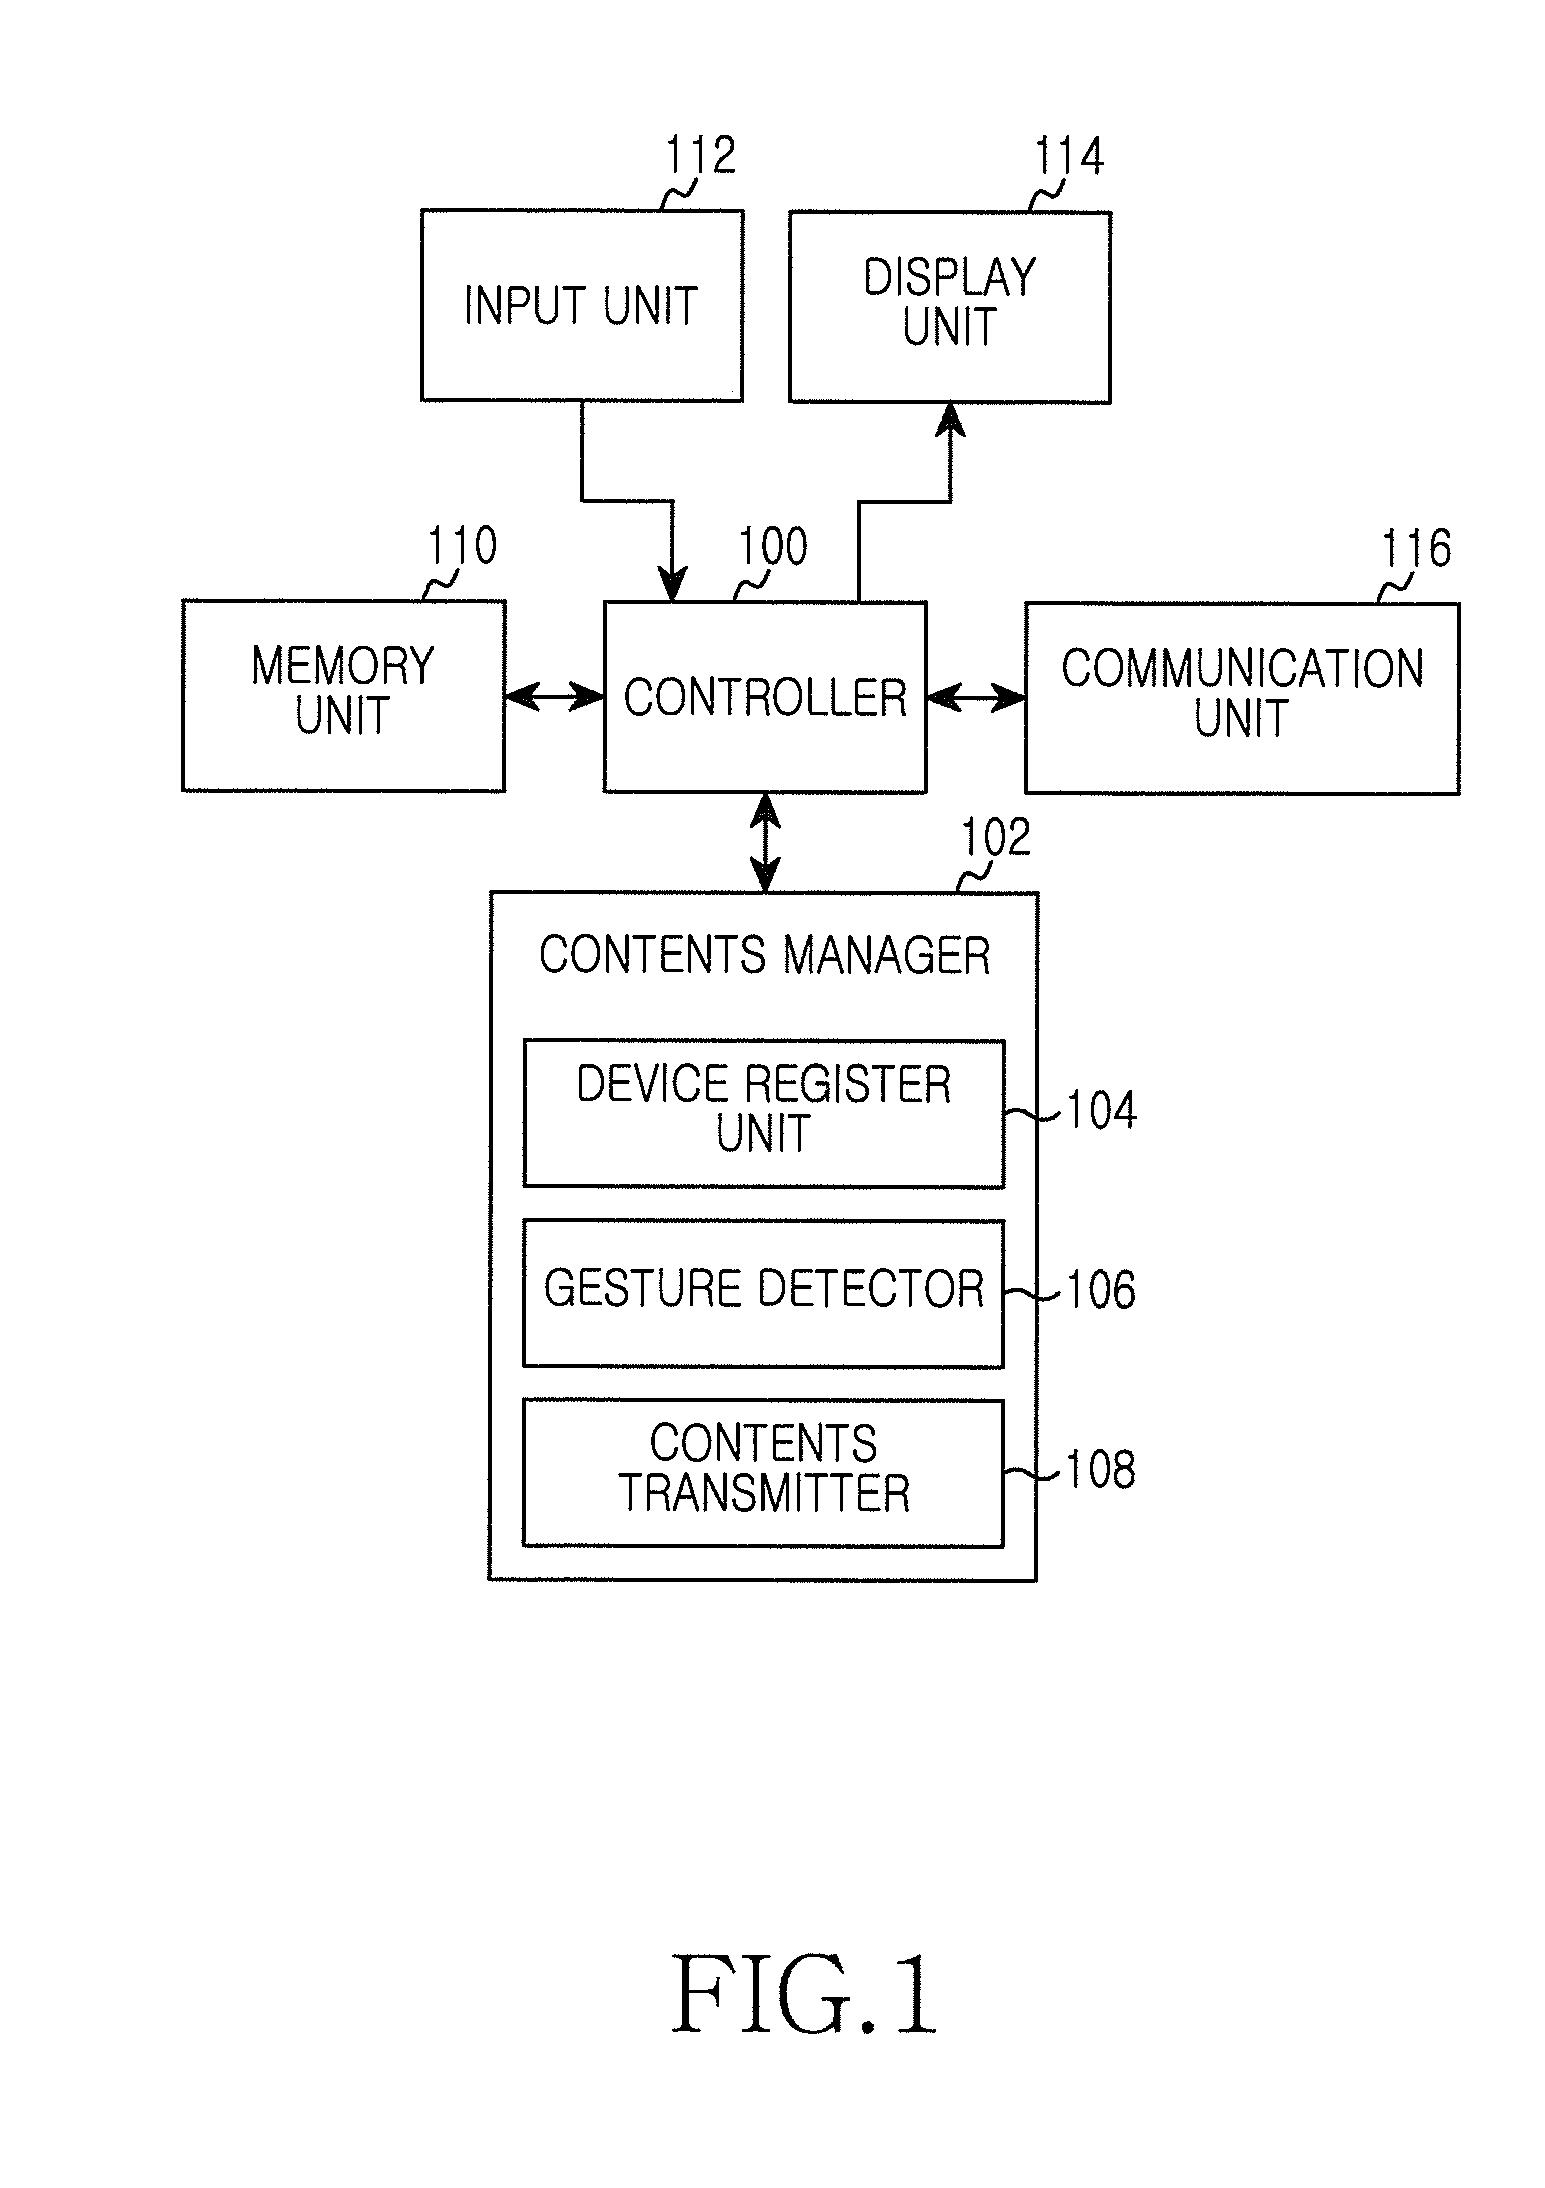 Apparatus and method for controlling controllable device in portable terminal